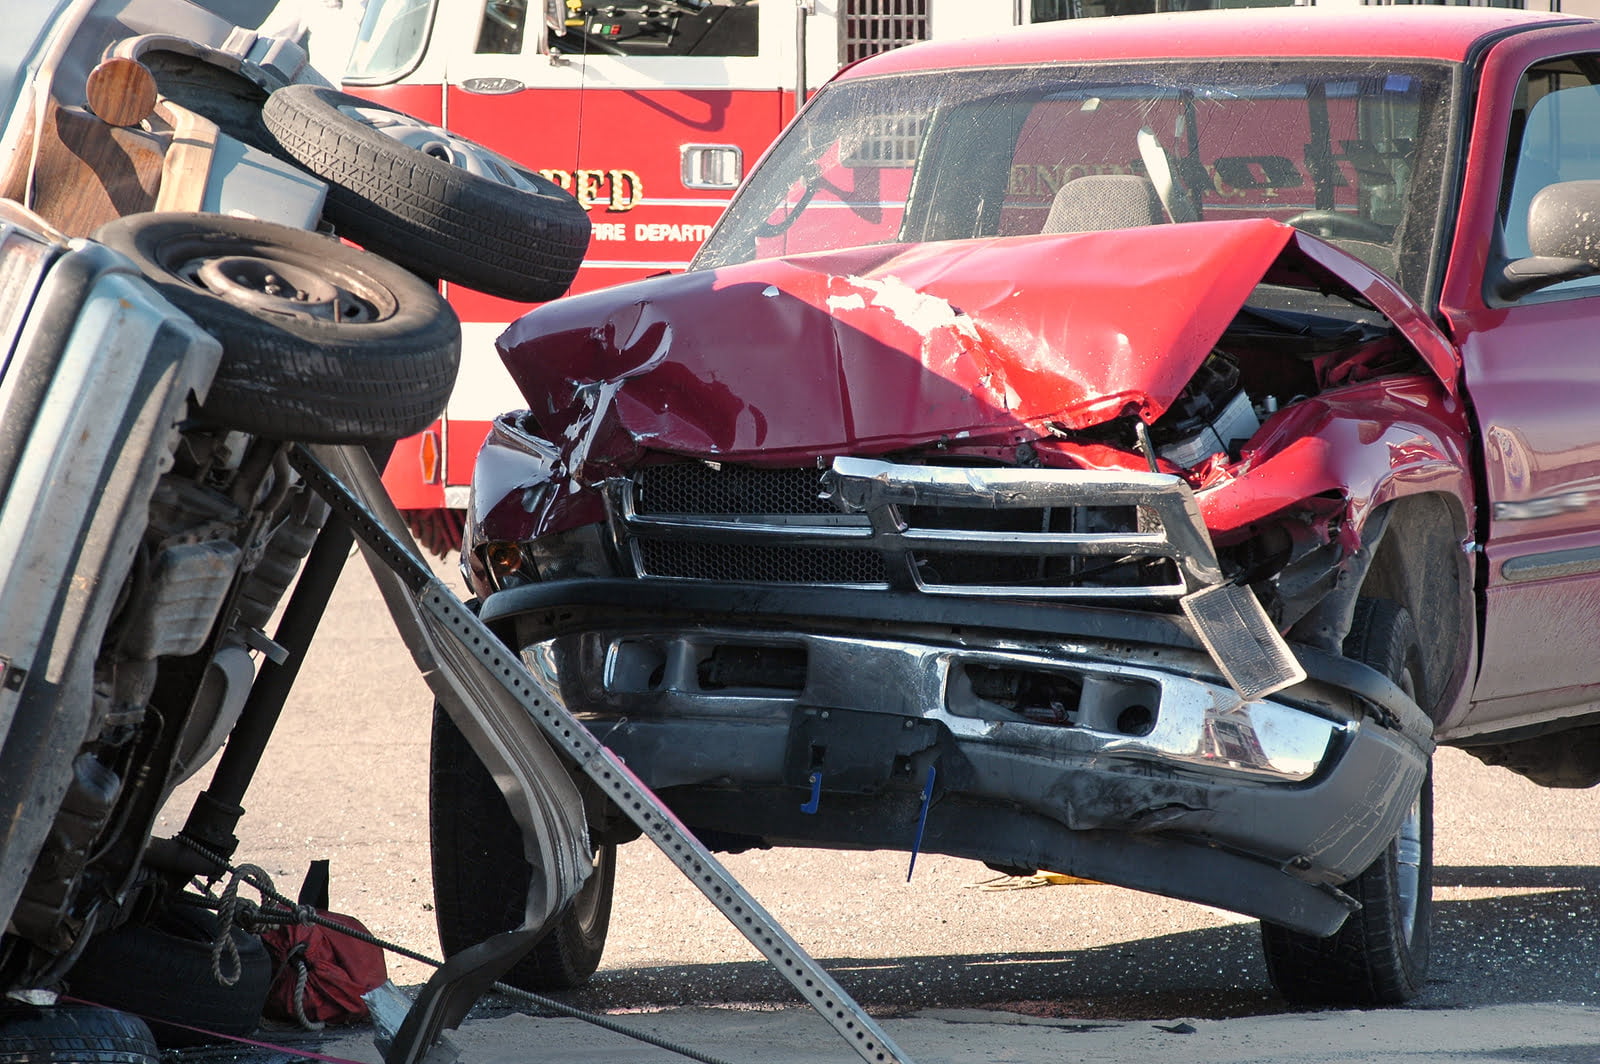 How Soon Should I Hire A Vehicle Accident Lawyer?